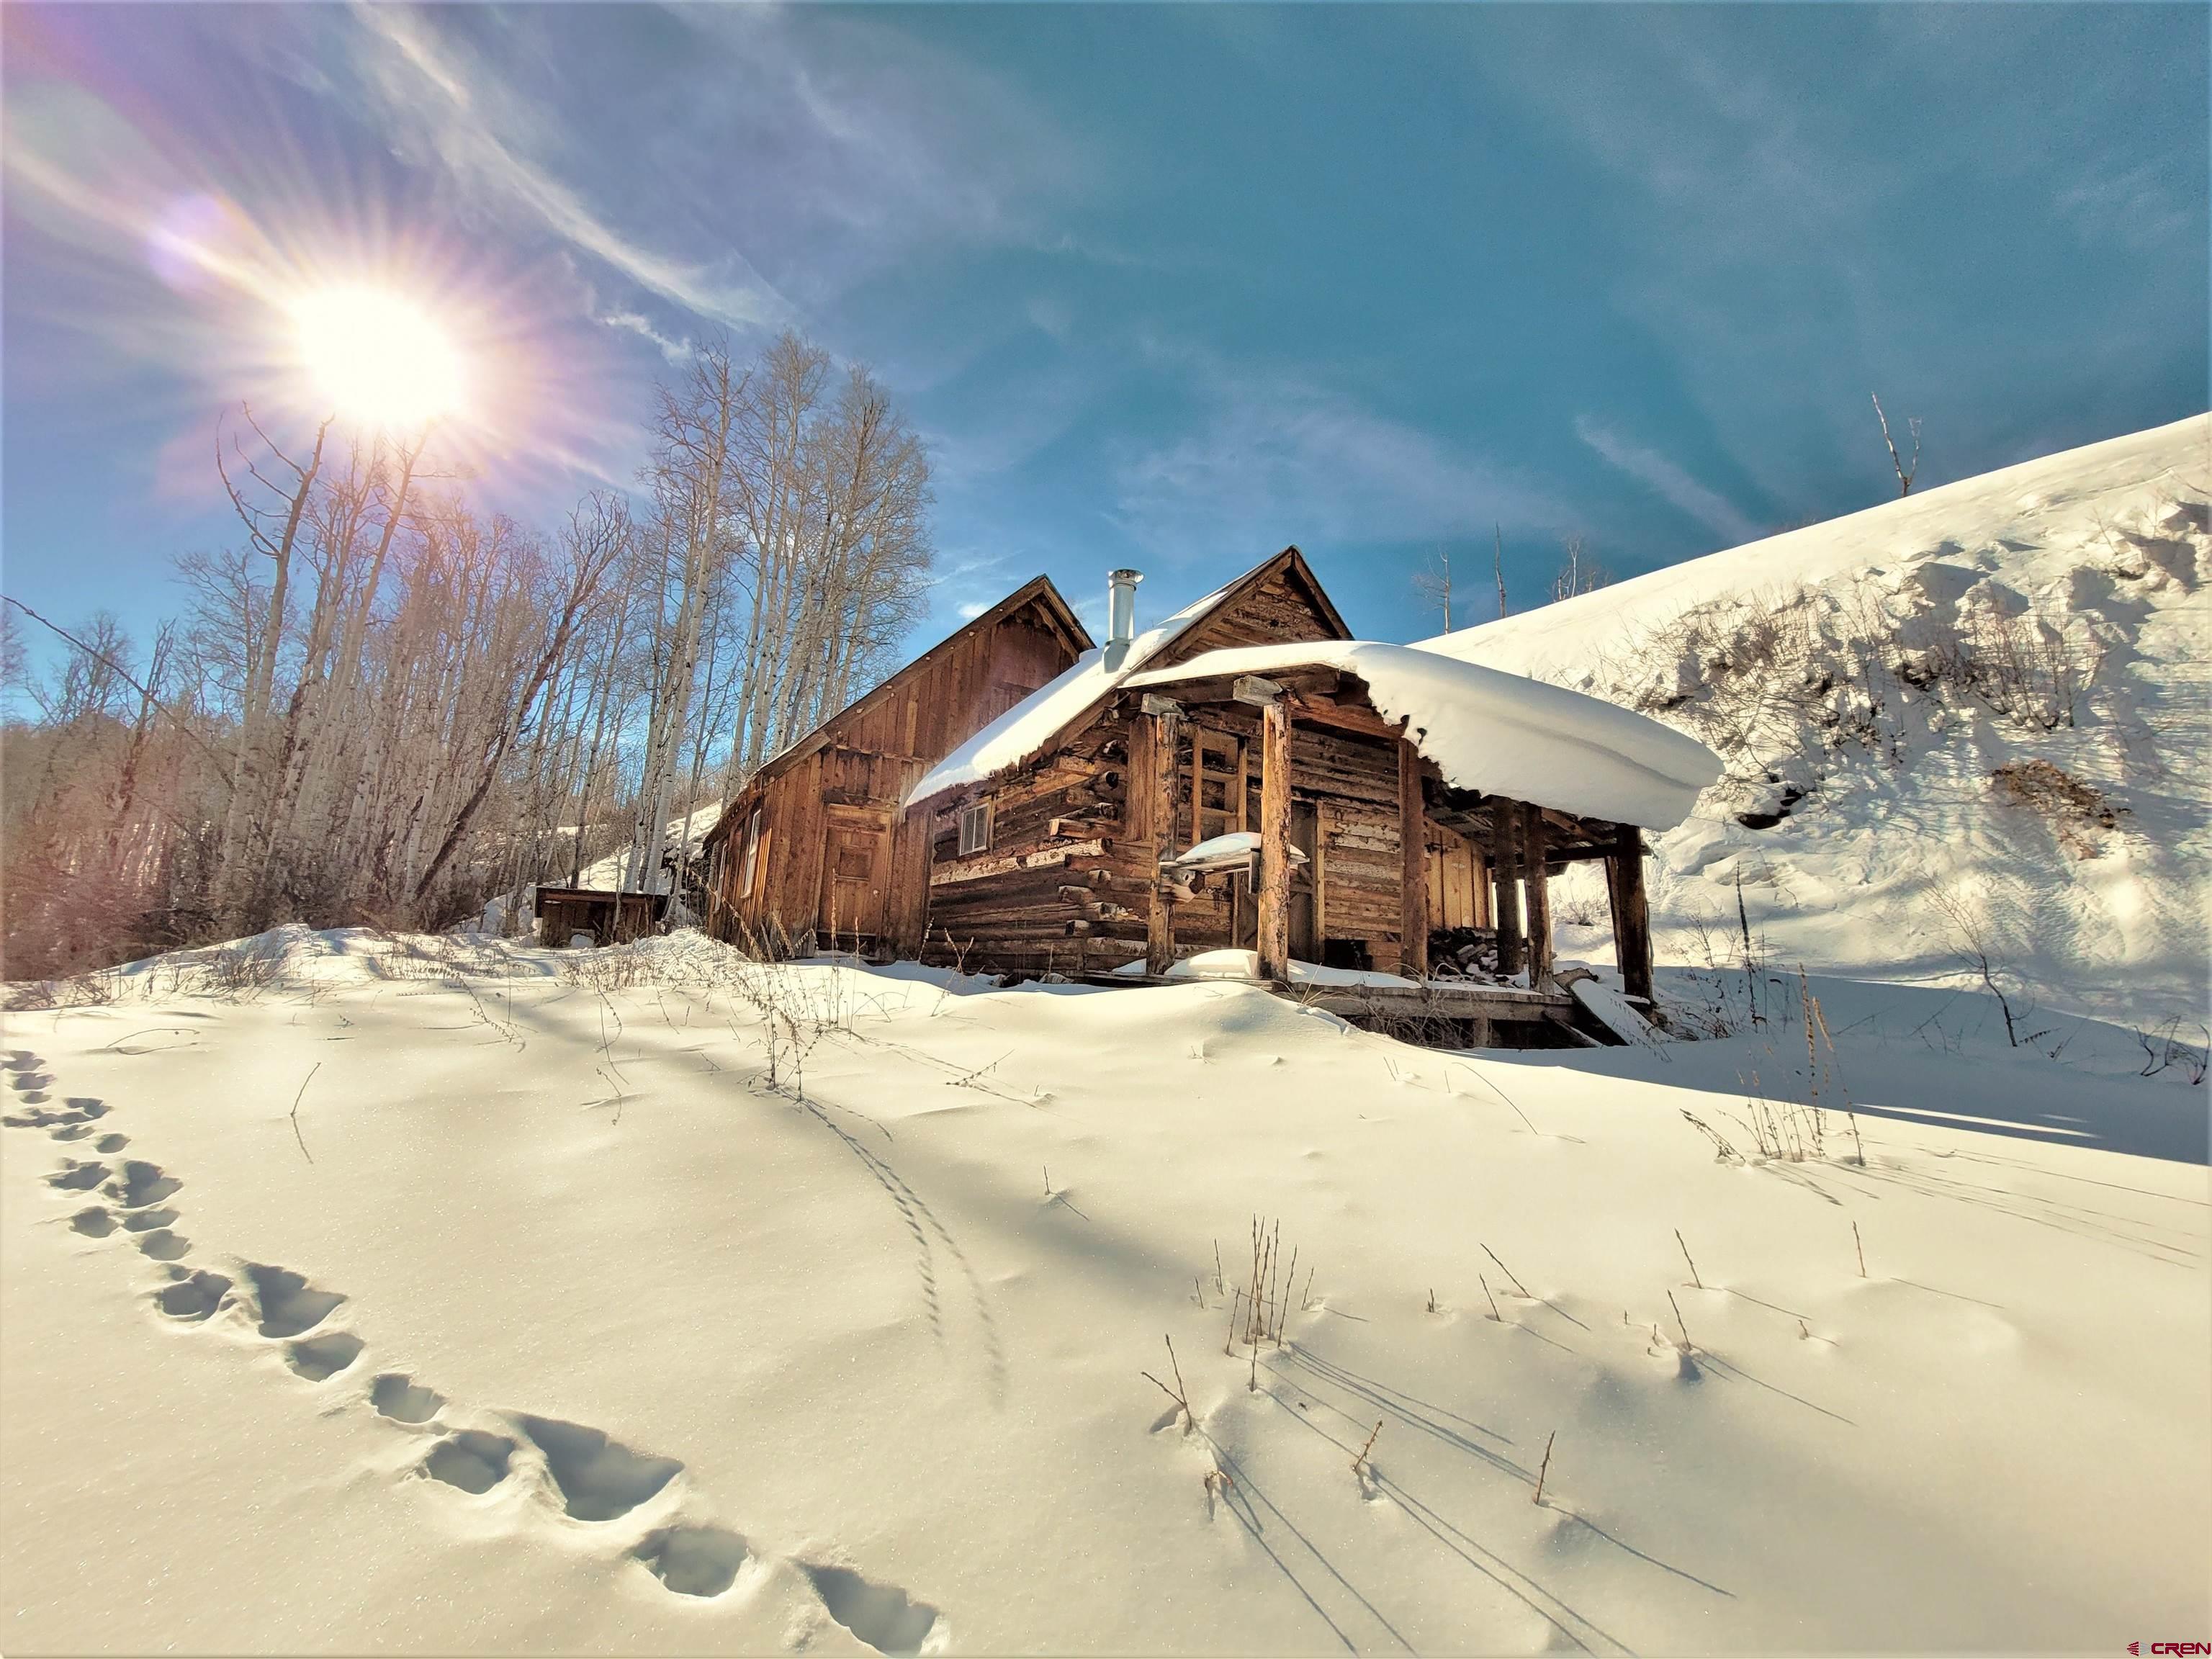 a view of a house with snow on the ground